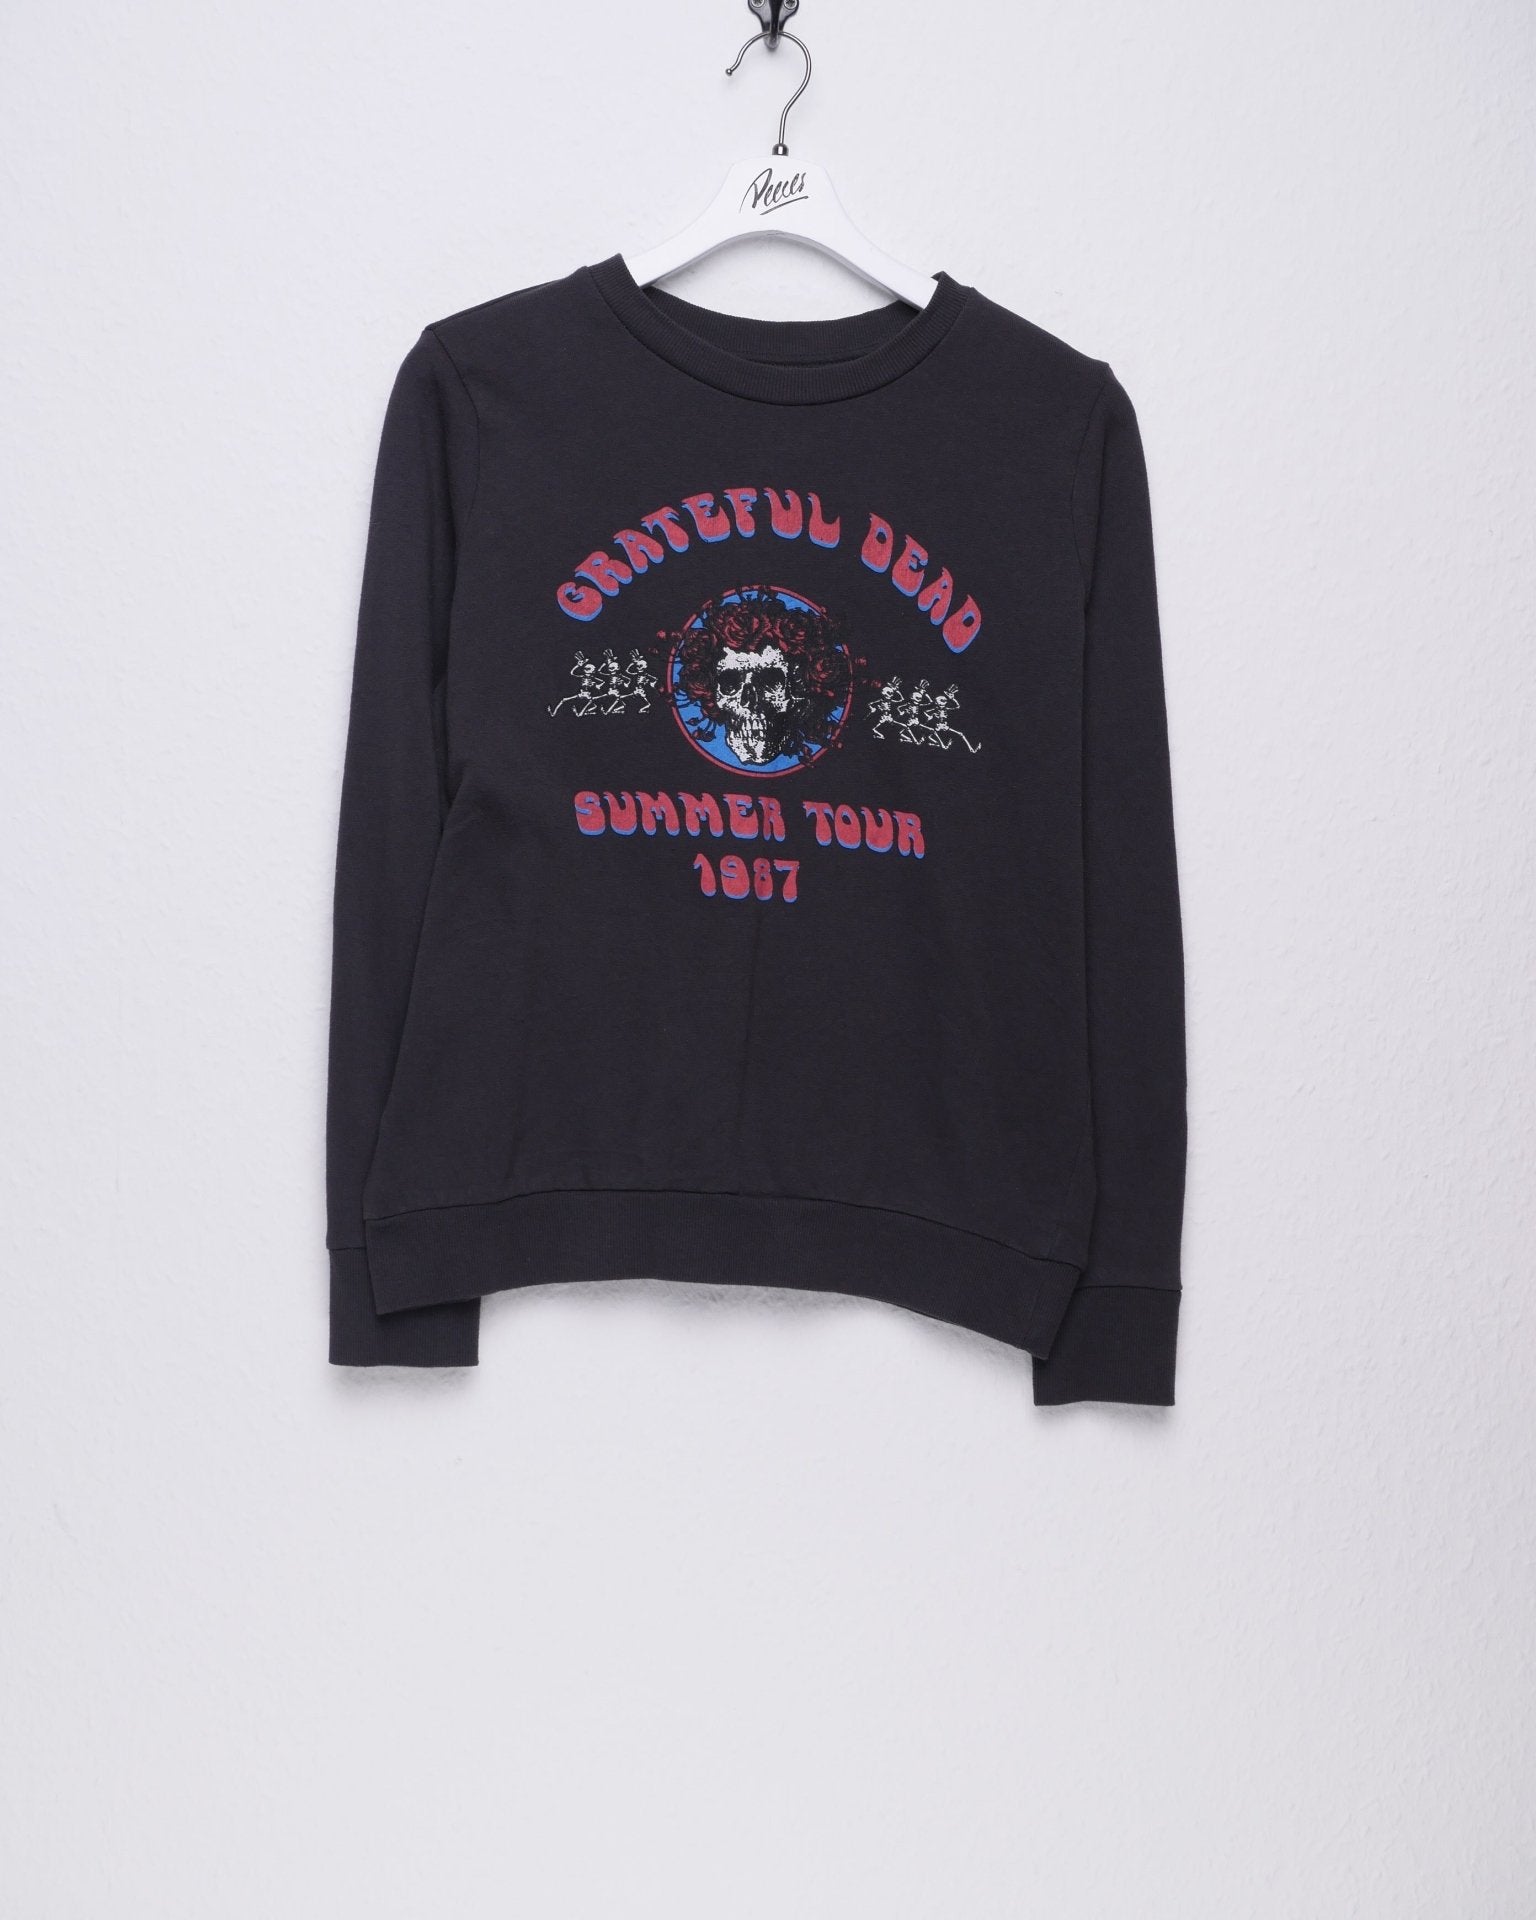 Greatful dead printed graphic L/S Shirt - Peeces